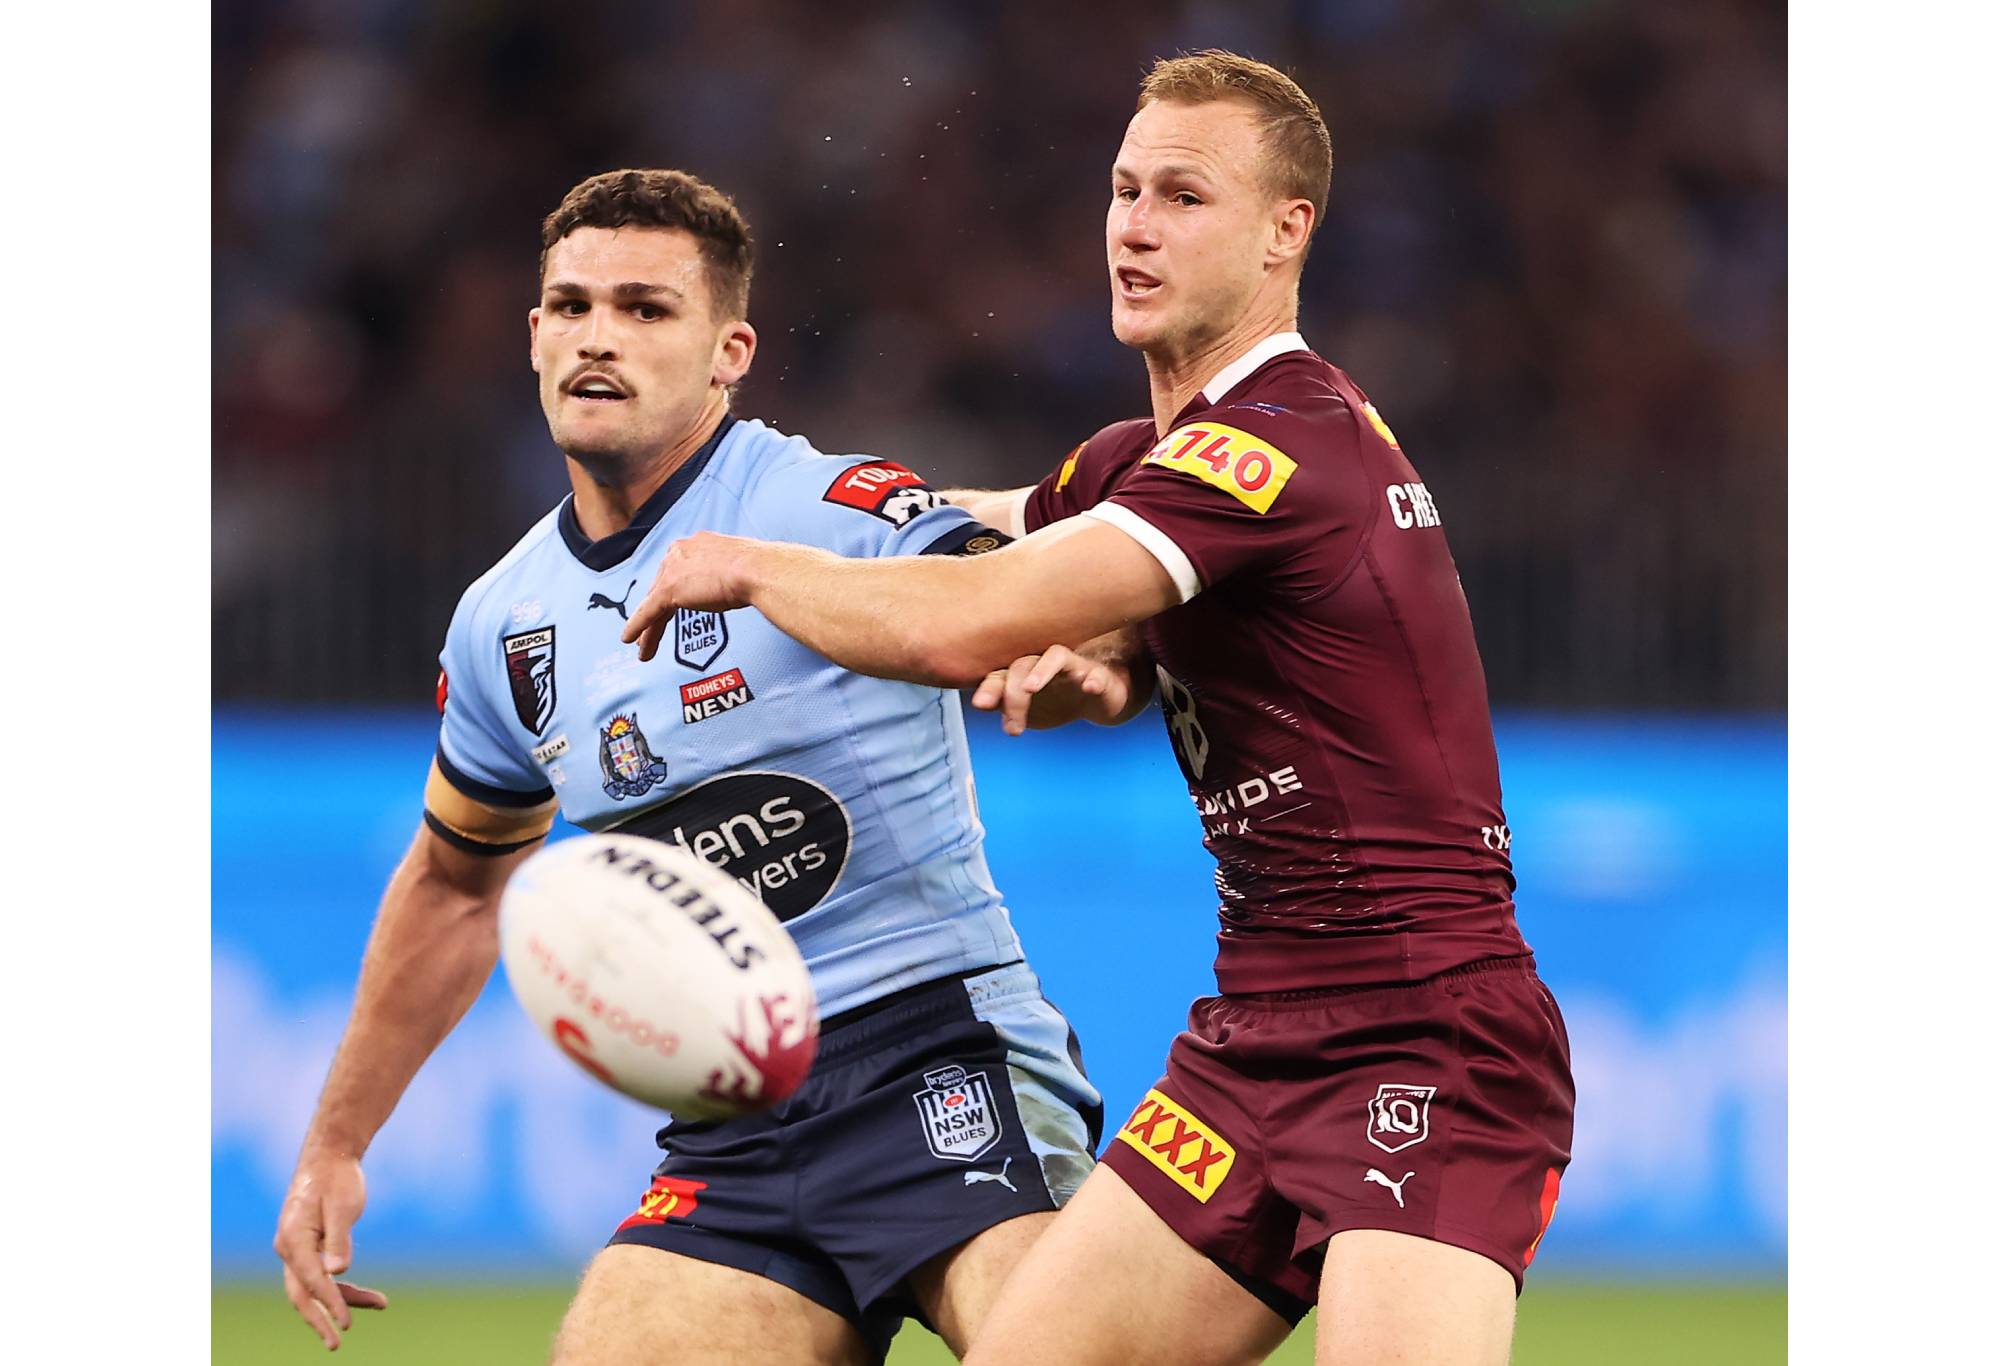 PERTH, AUSTRALIA - JUNE 26: Nathan Cleary of the Blues kicks next to Daly Cherry-Evans of the Maroons during game two of the State of Origin series between New South Wales Blues and Queensland Maroons at Optus Stadium, on June 26, 2022, in Perth, Australia. (Photo by Mark Kolbe/Getty Images)